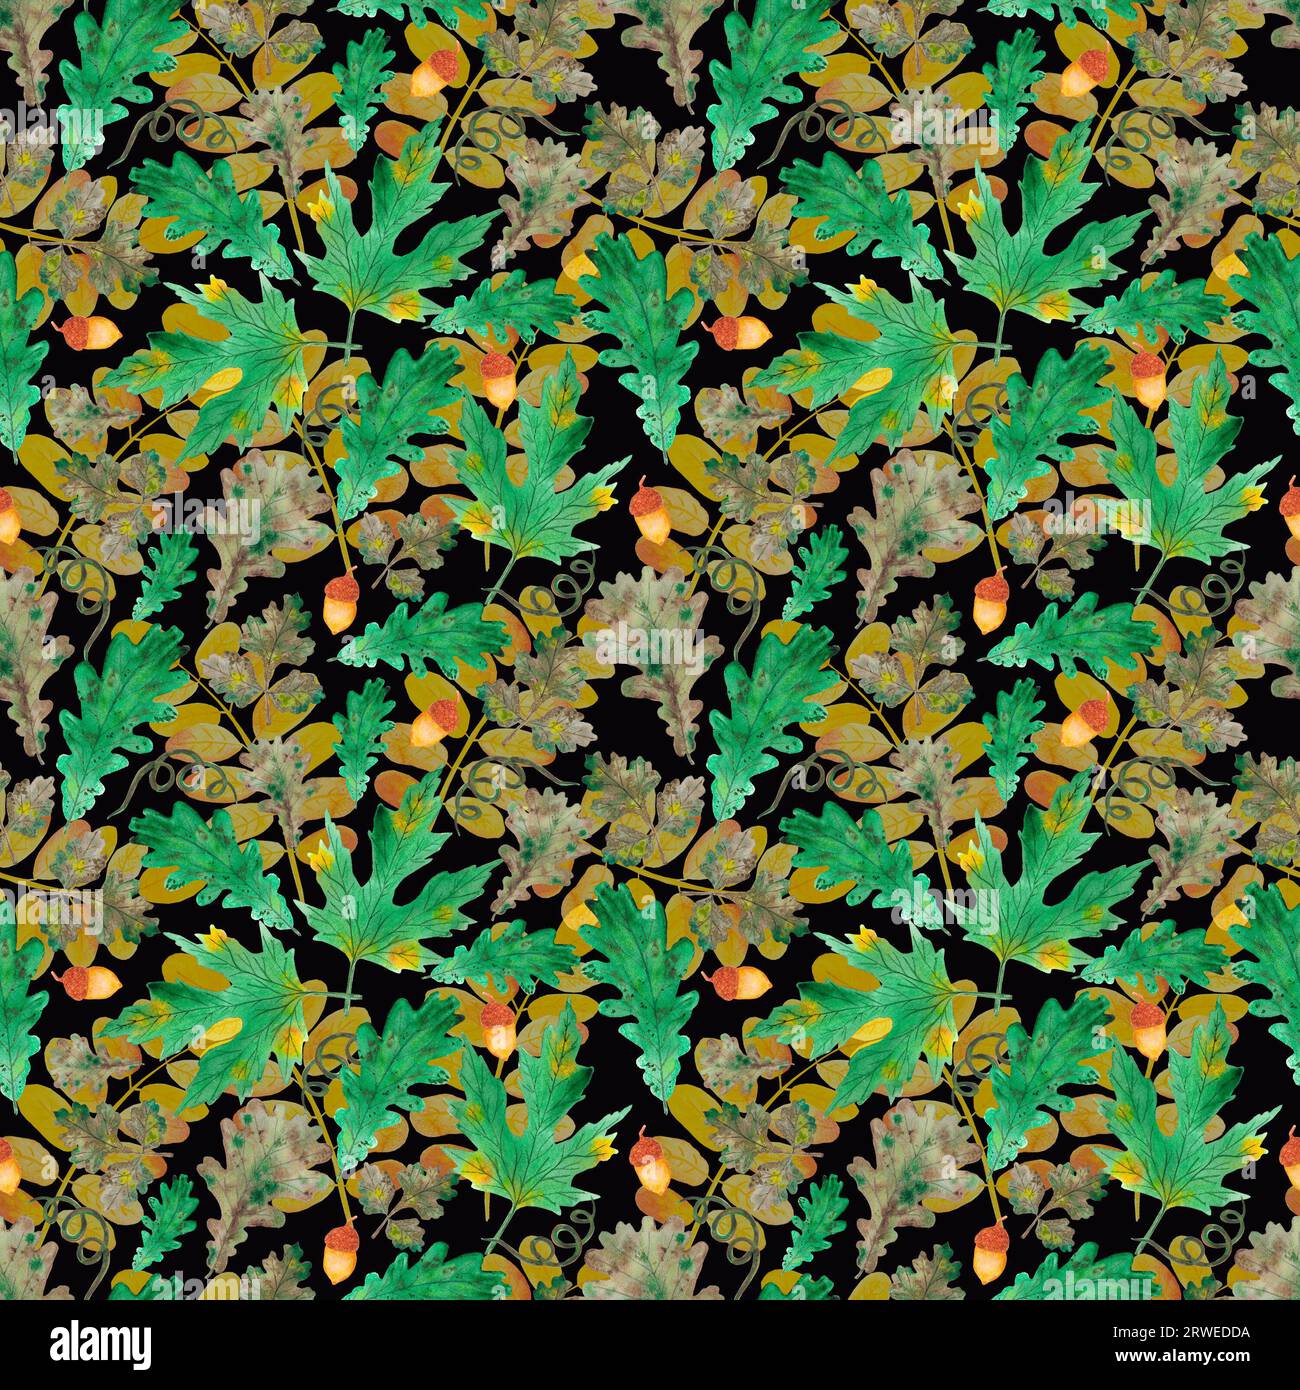 Hand drawn watercolor autumn leaves seamless pattern on black background. Can be used for textile, Scrapbook, fabric and other printed products Stock Photo